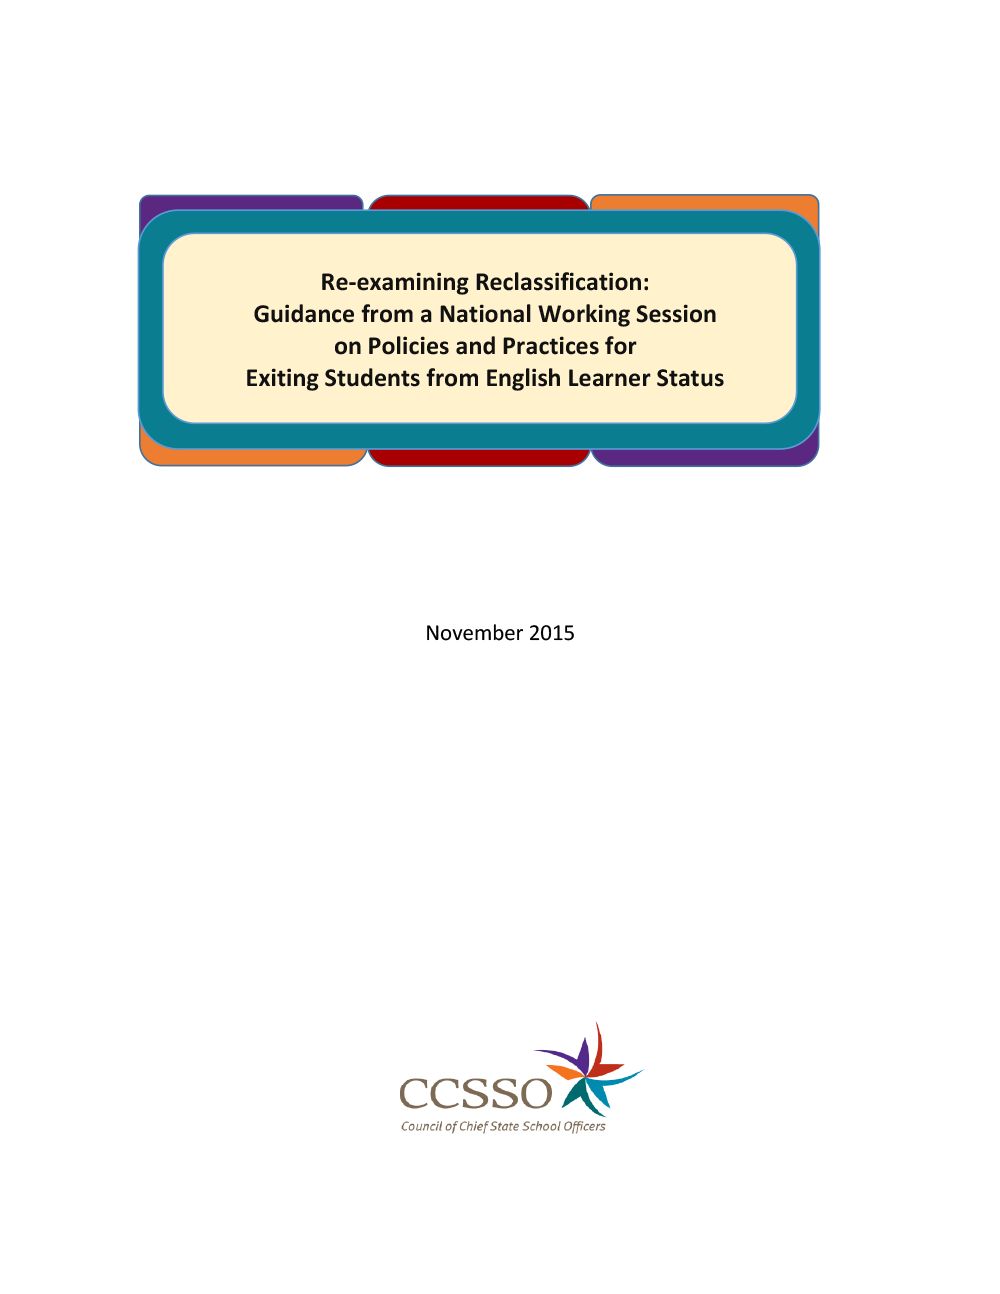 Cover for Re-examining Reclassification: Guidance from a National Working Session on Policies and Practices for Exiting Students from English Learner Status